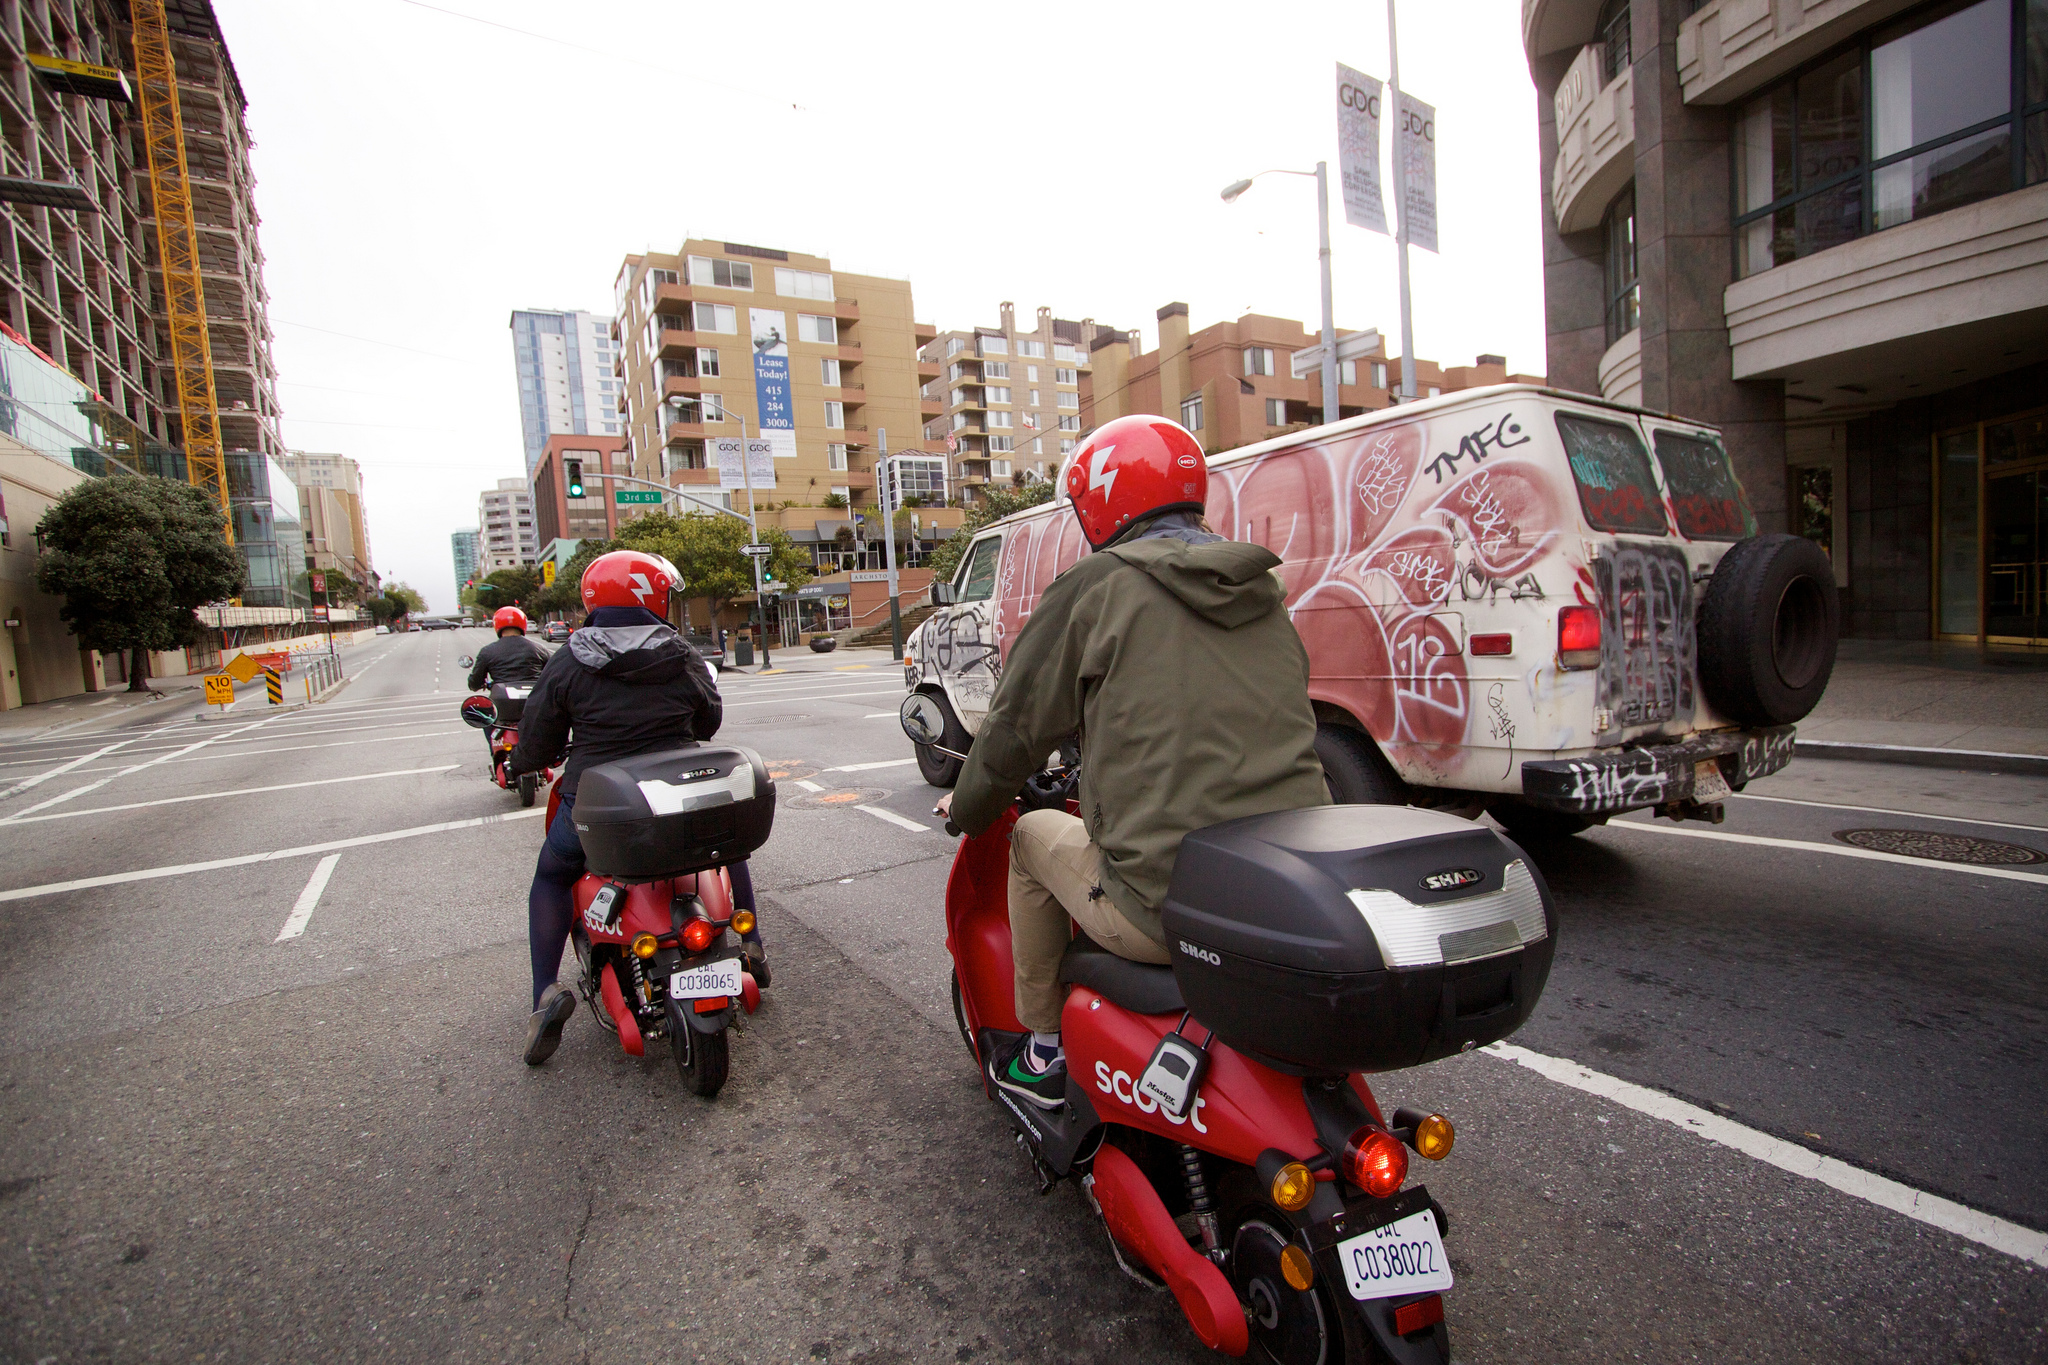 Two people in dark jackets ride red scooters down a busy city street in front of a white cargo van with red graffiti on the side.